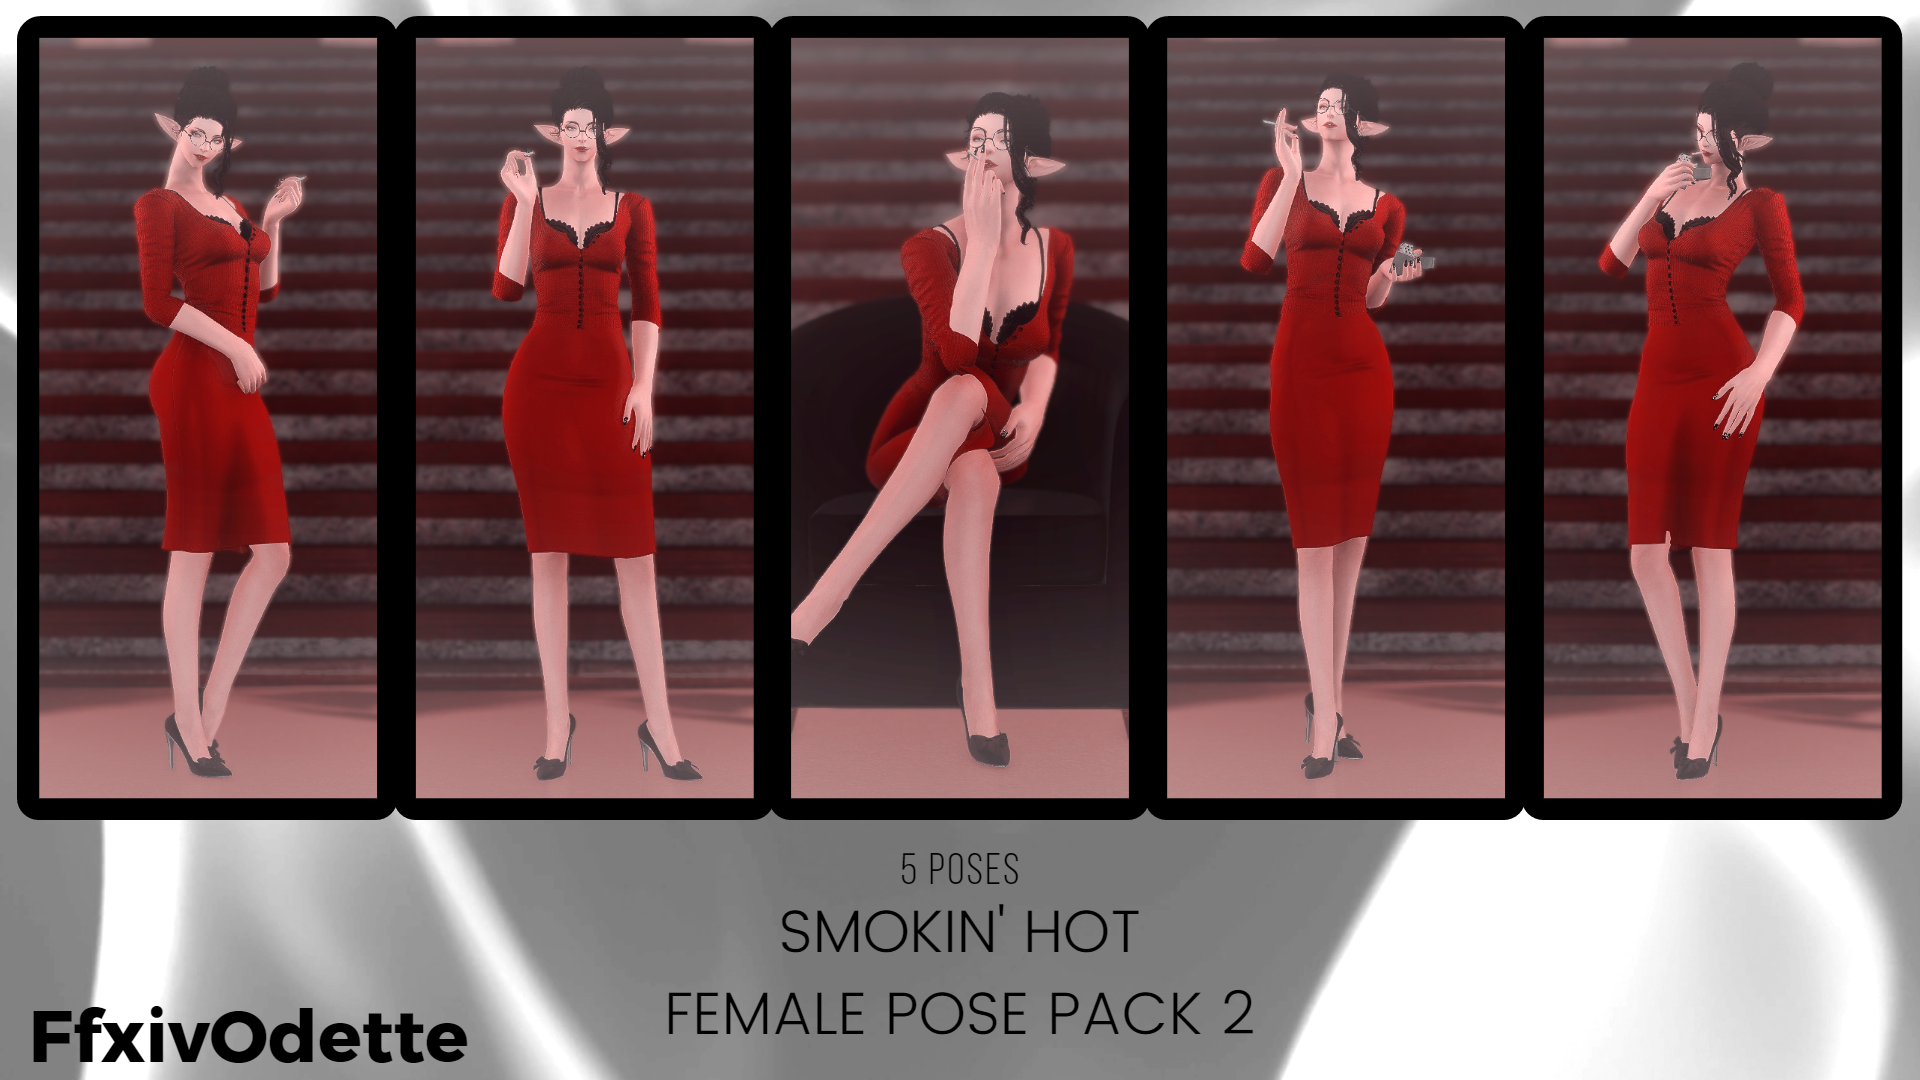 FightDodge pose pack | You name it, I'll pose it!